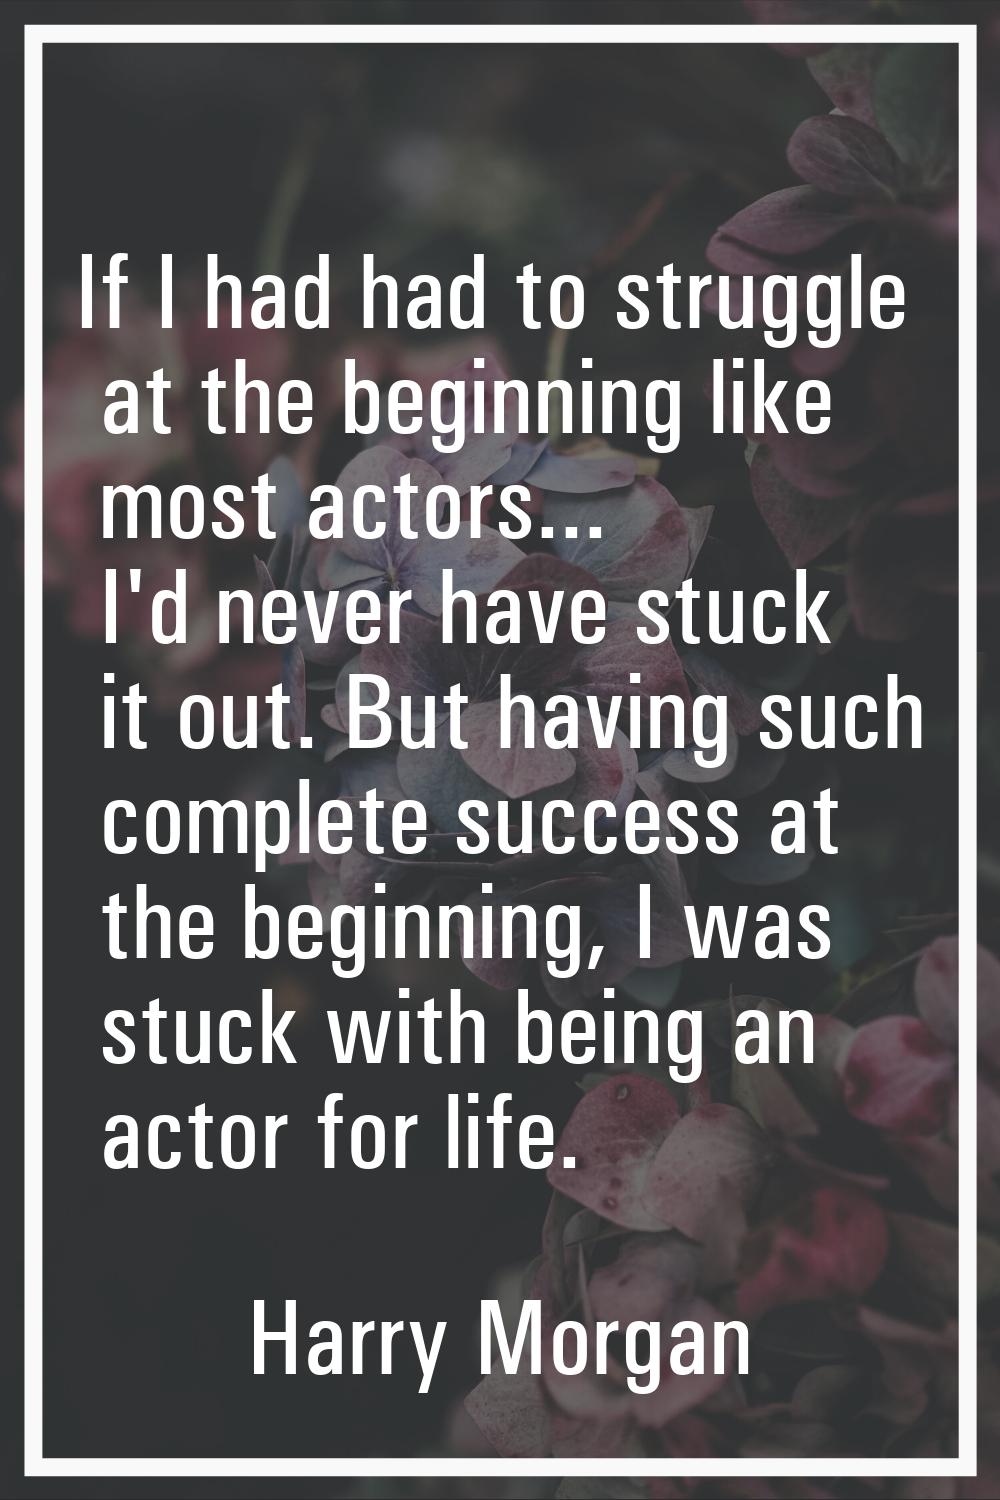 If I had had to struggle at the beginning like most actors... I'd never have stuck it out. But havi